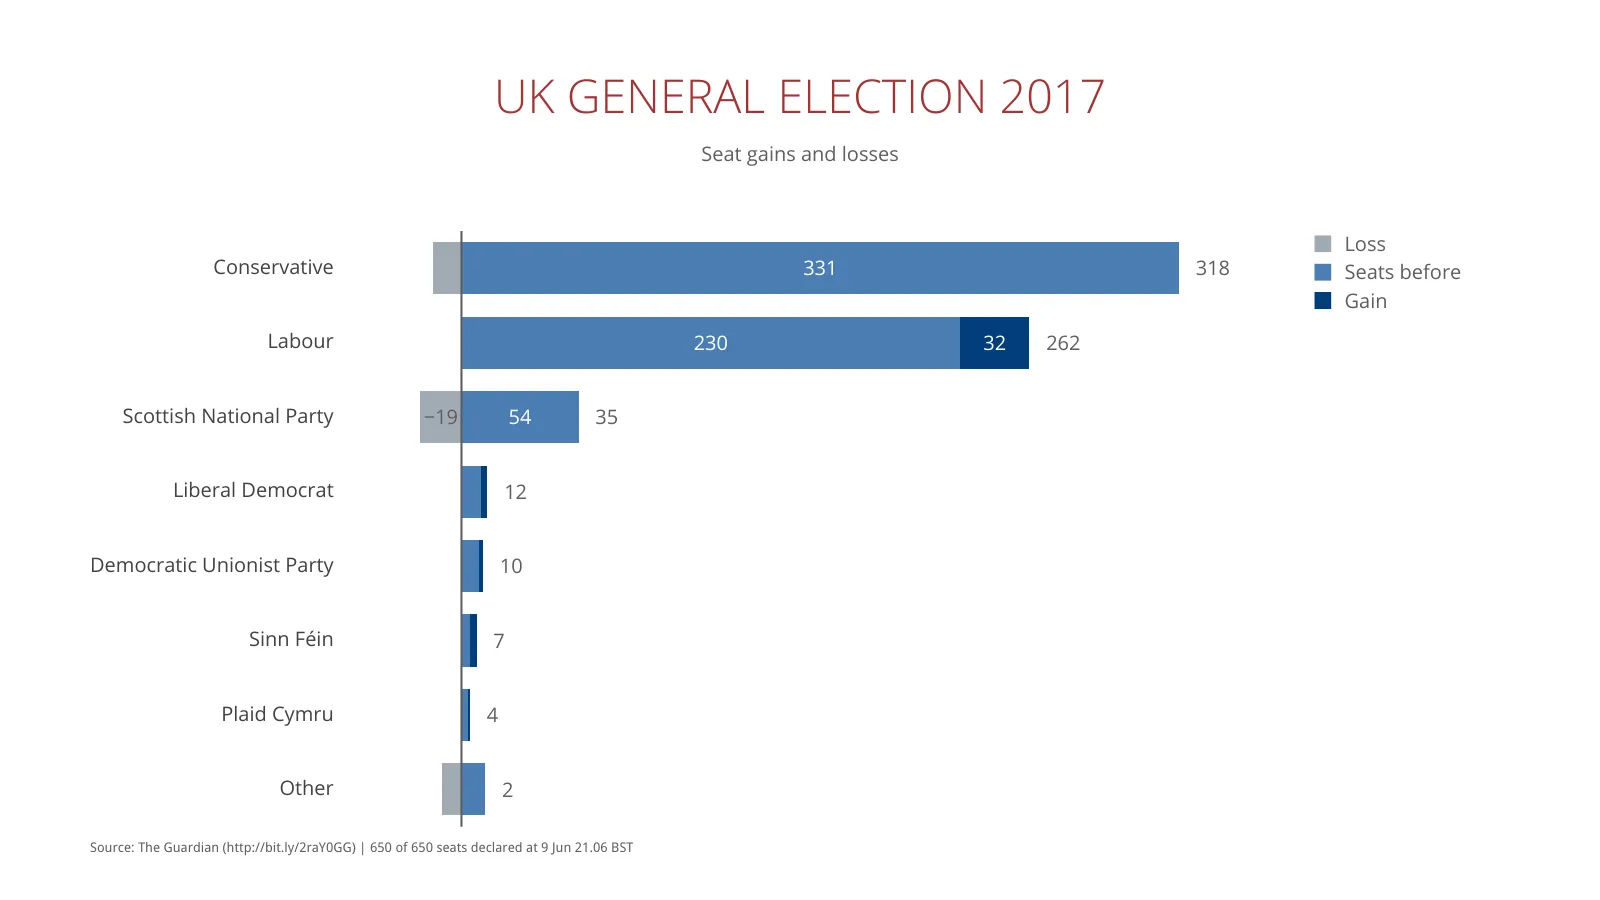 Stacked Bar Chart example: UK GENERAL ELECTION 2017